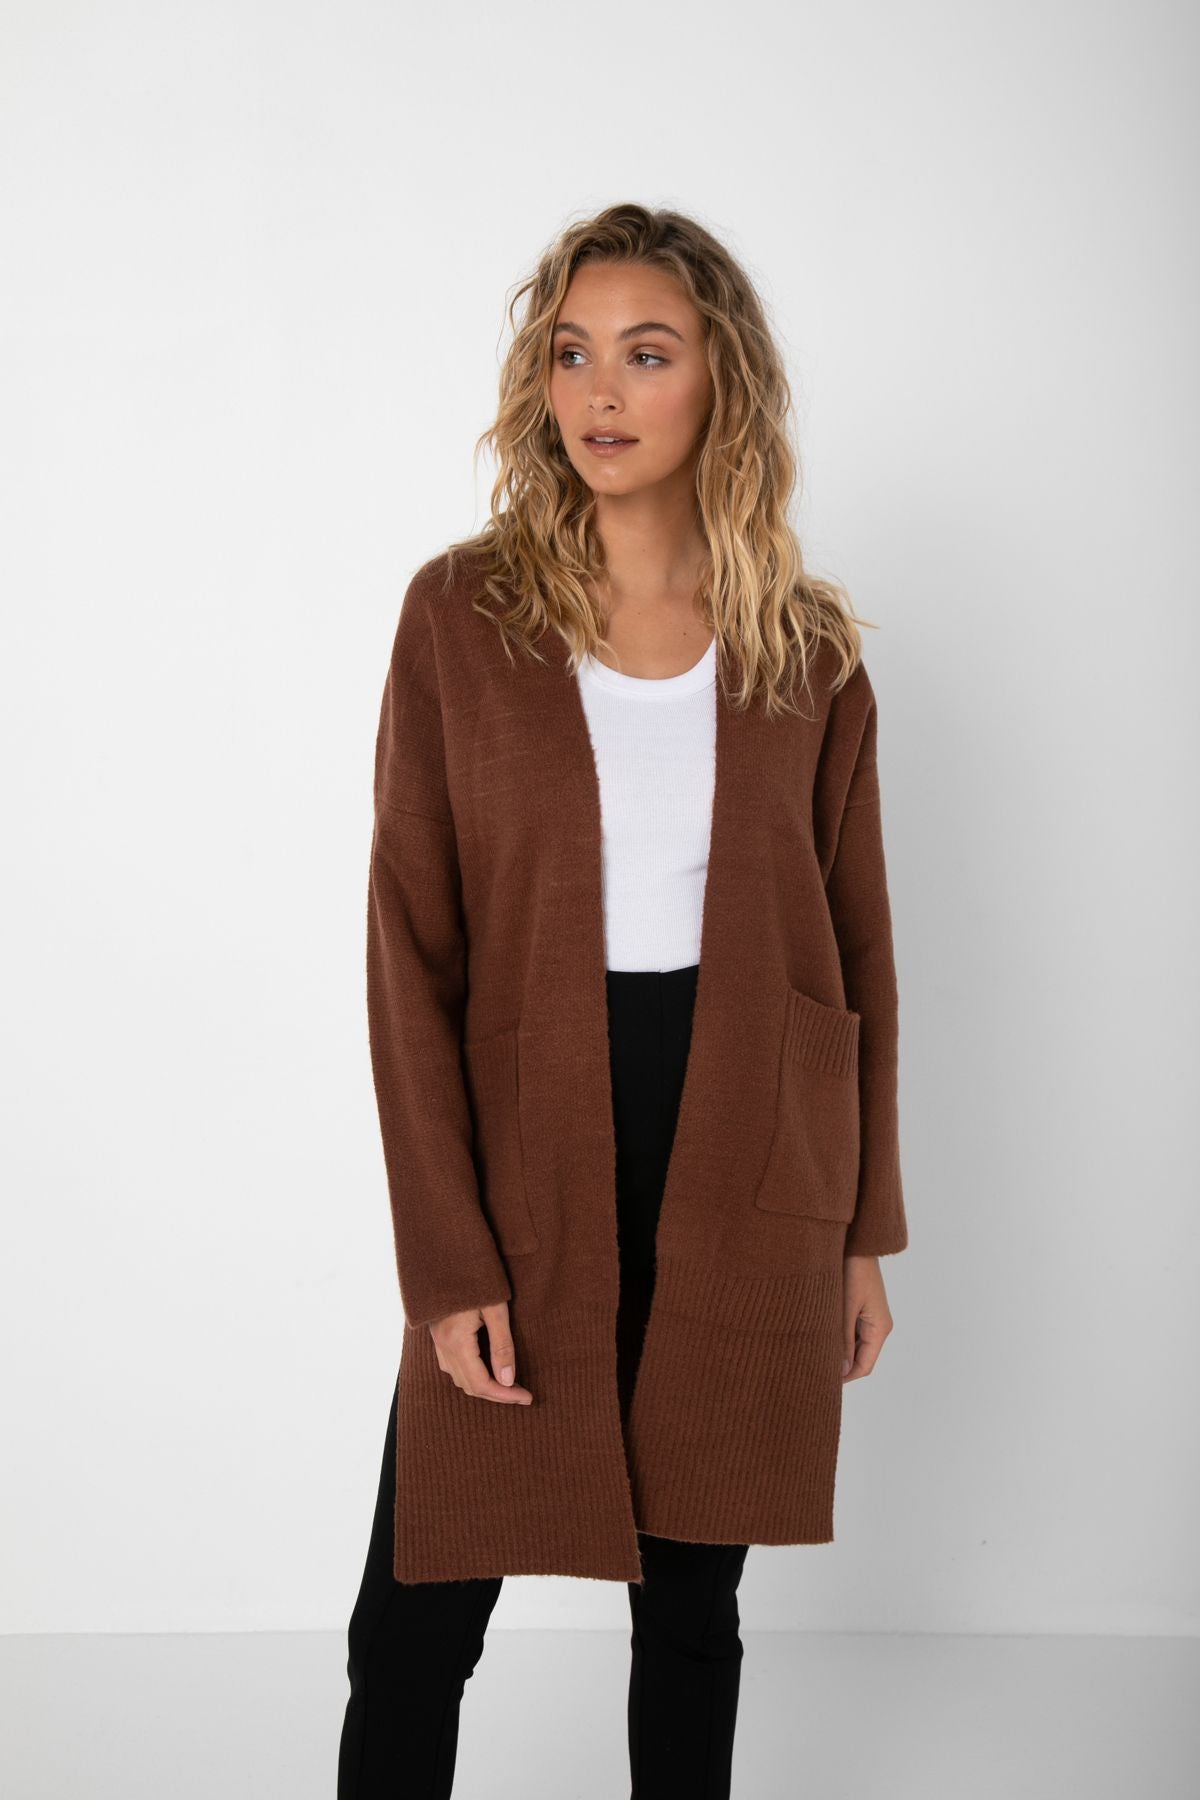 Curled Bailage Caucasian Female wearing an Open Front  Basic  Versatile  Dropped Shoulder  Two Deep Side Pockets  Two Side Split  Slightly Oversized  Ribbed Hemline And Cuffs  Long Sleeved Cardigan  in Rich Dark Chocolate paired with high waisted stretchy black denim skinny jeans 